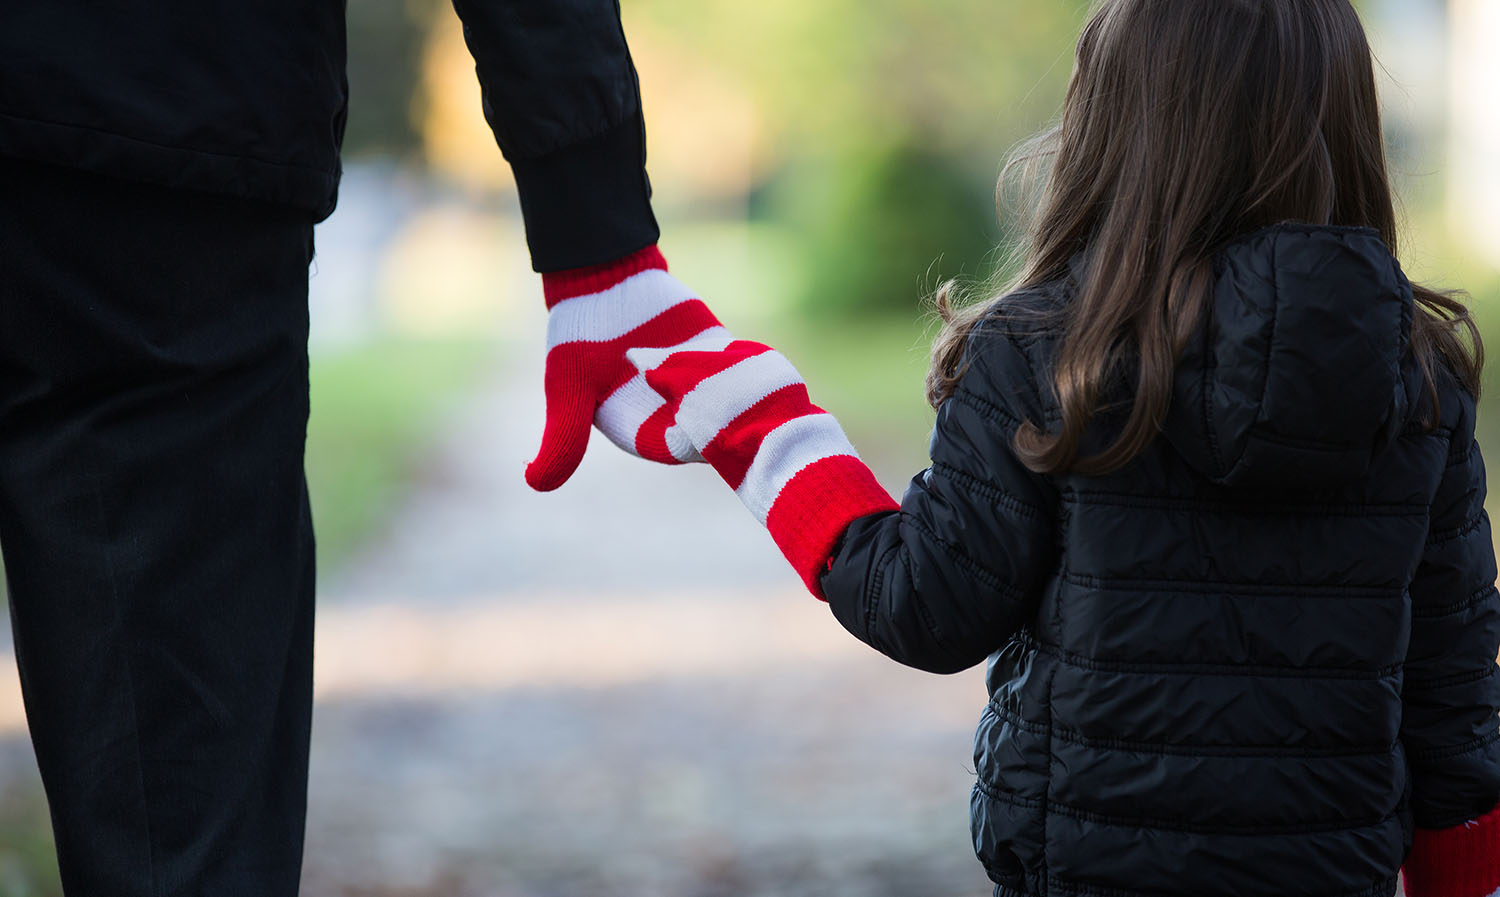 Adult and child holding hands wearing red and white striped gloves